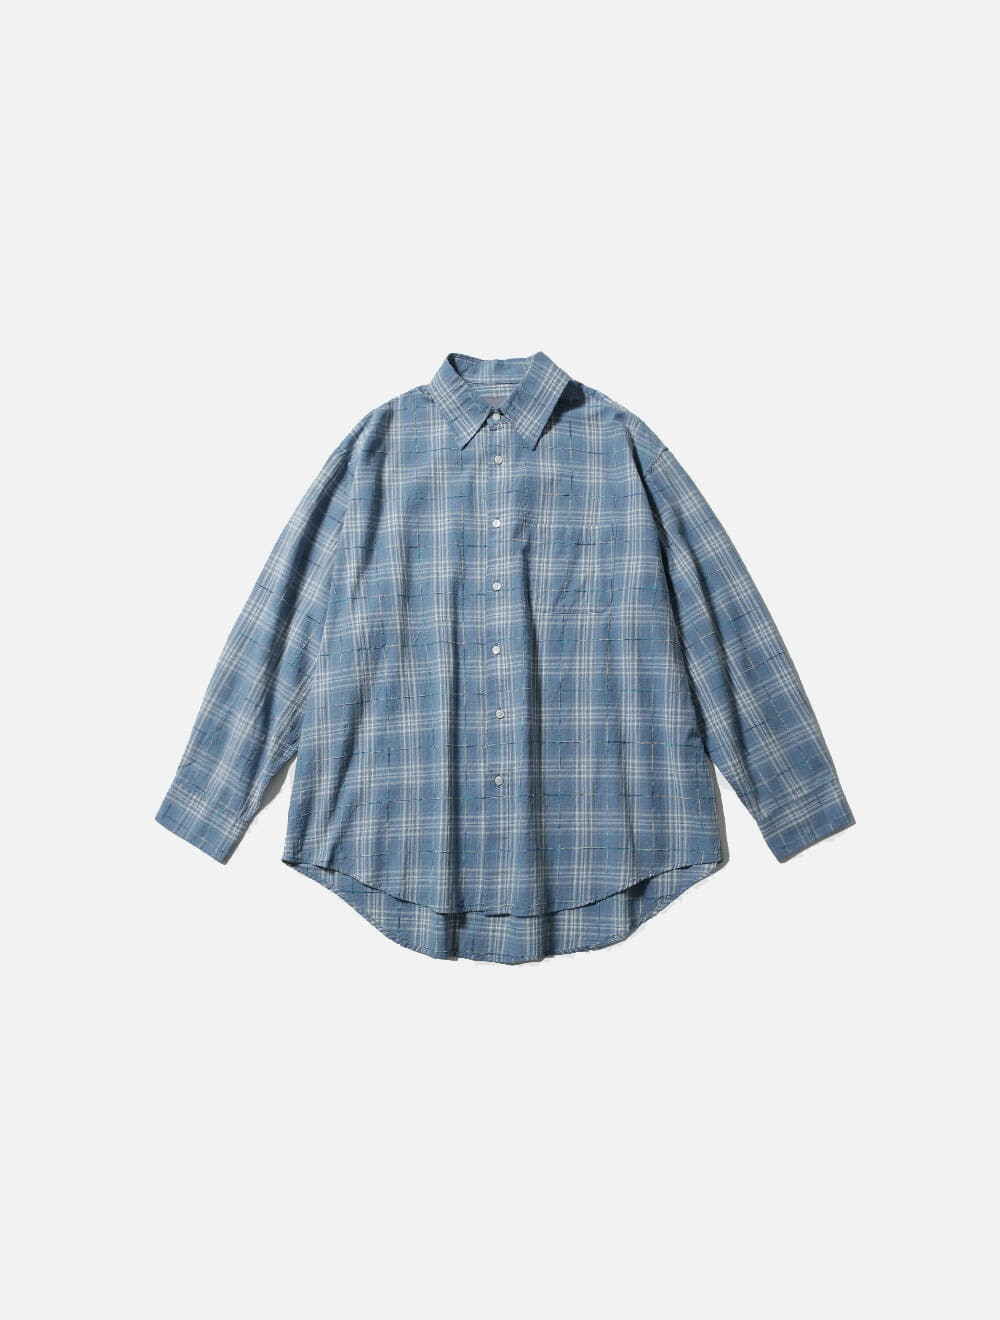 ALL WEATHER OVER SILHOUETTE SHIRT (BLUE CHECK)